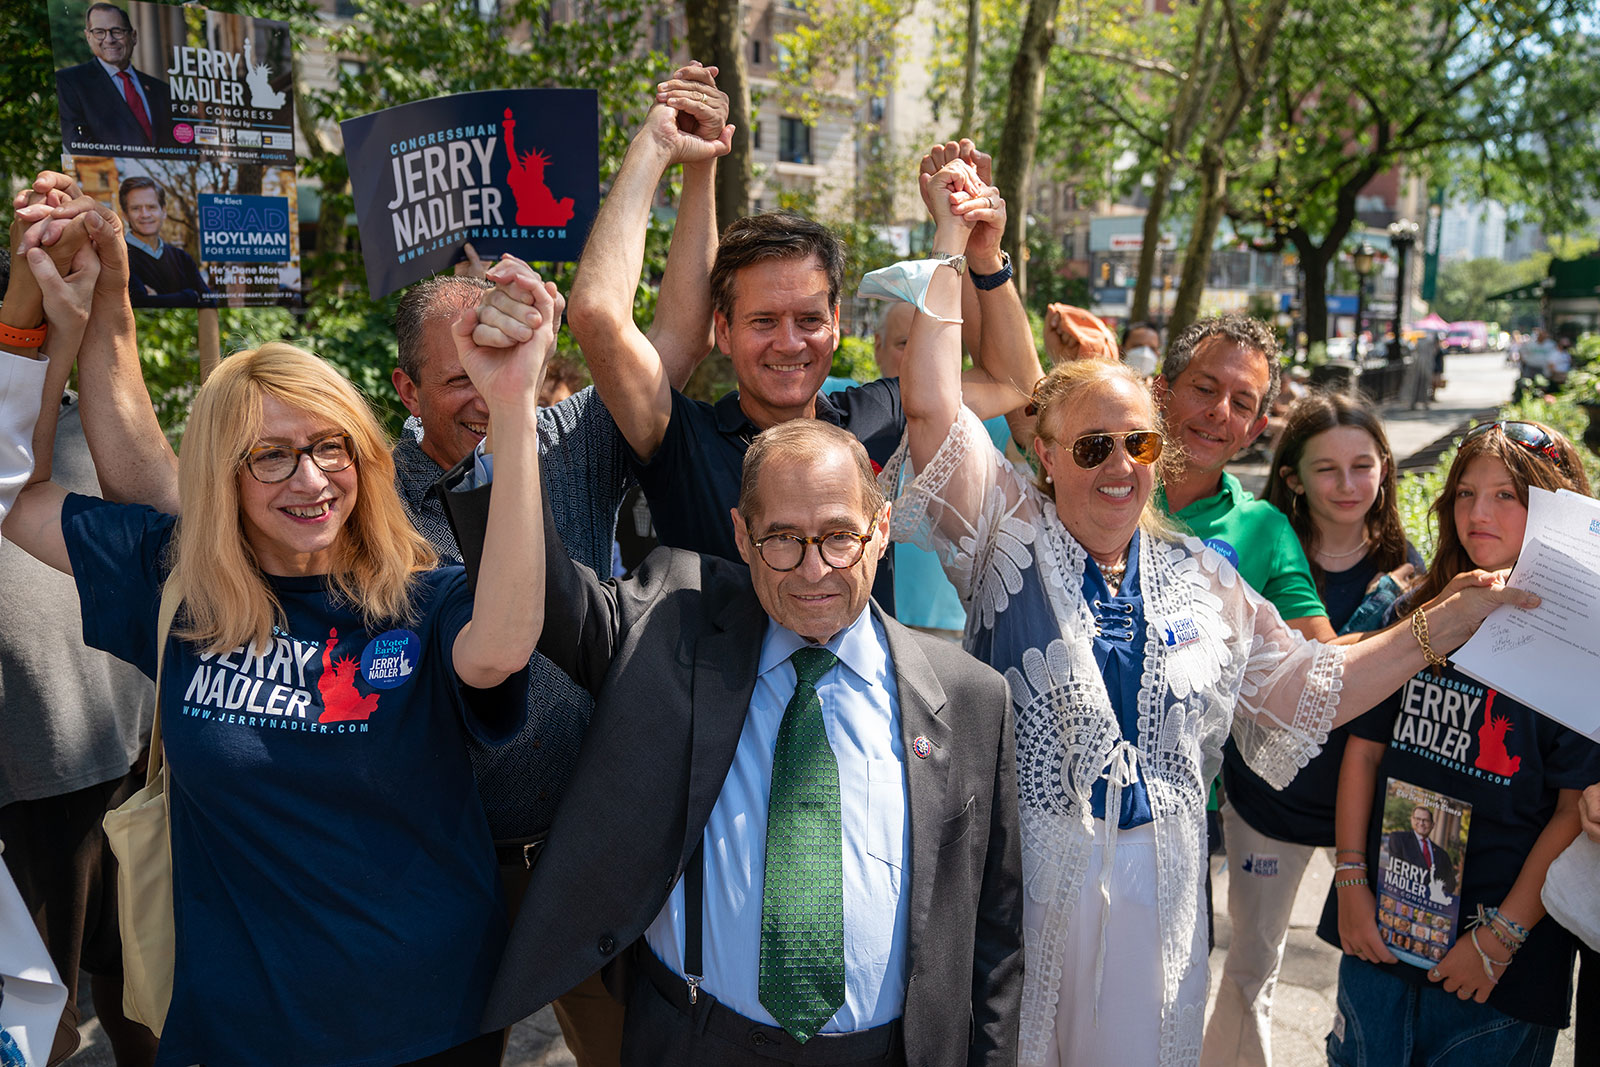 Rep. Jerry Nadler holds a campaign rally in Manhattan on August 20. Nadler will win the Democratic nomination for New York’s 12th Congressional District, CNN projects, defeating fellow longtime Rep. Carolyn Maloney.